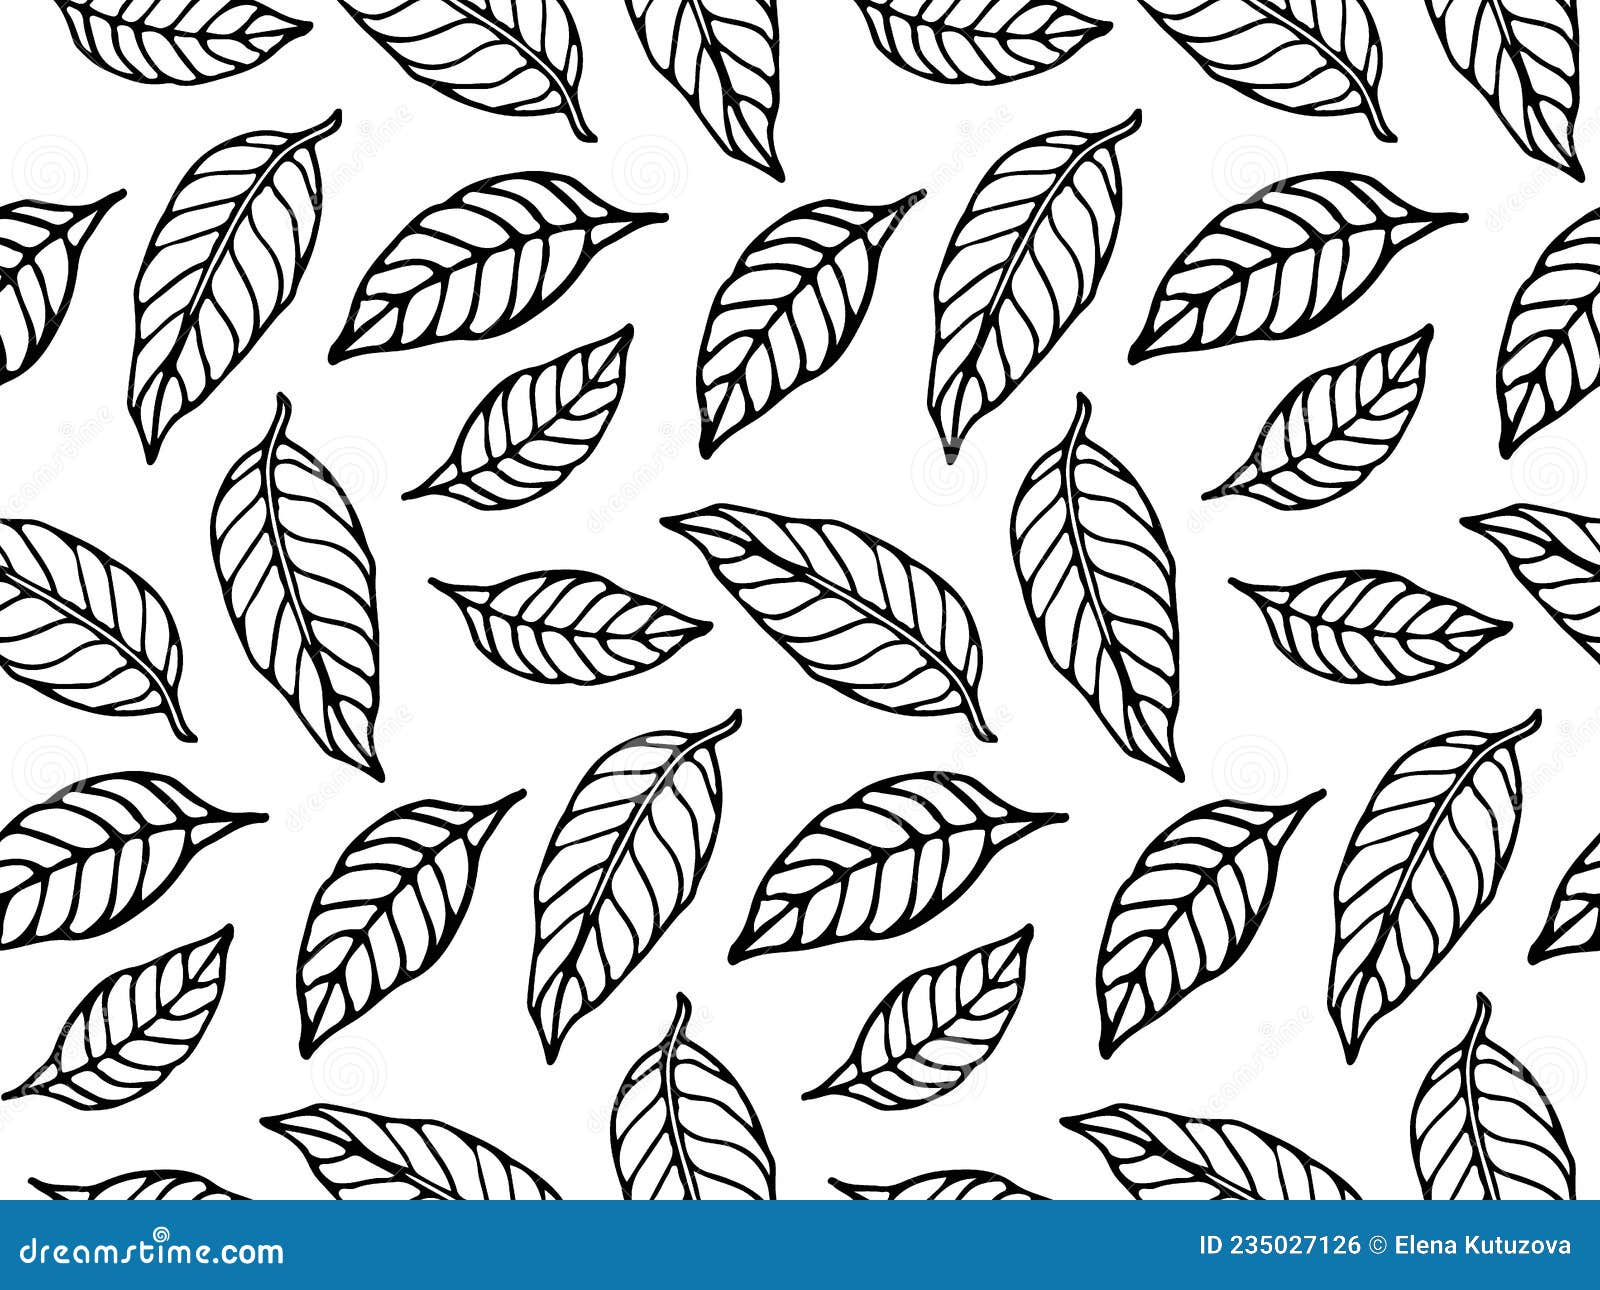 Tea Leaves Sketch Seamless Pattern. Vlack and White Leaves Background